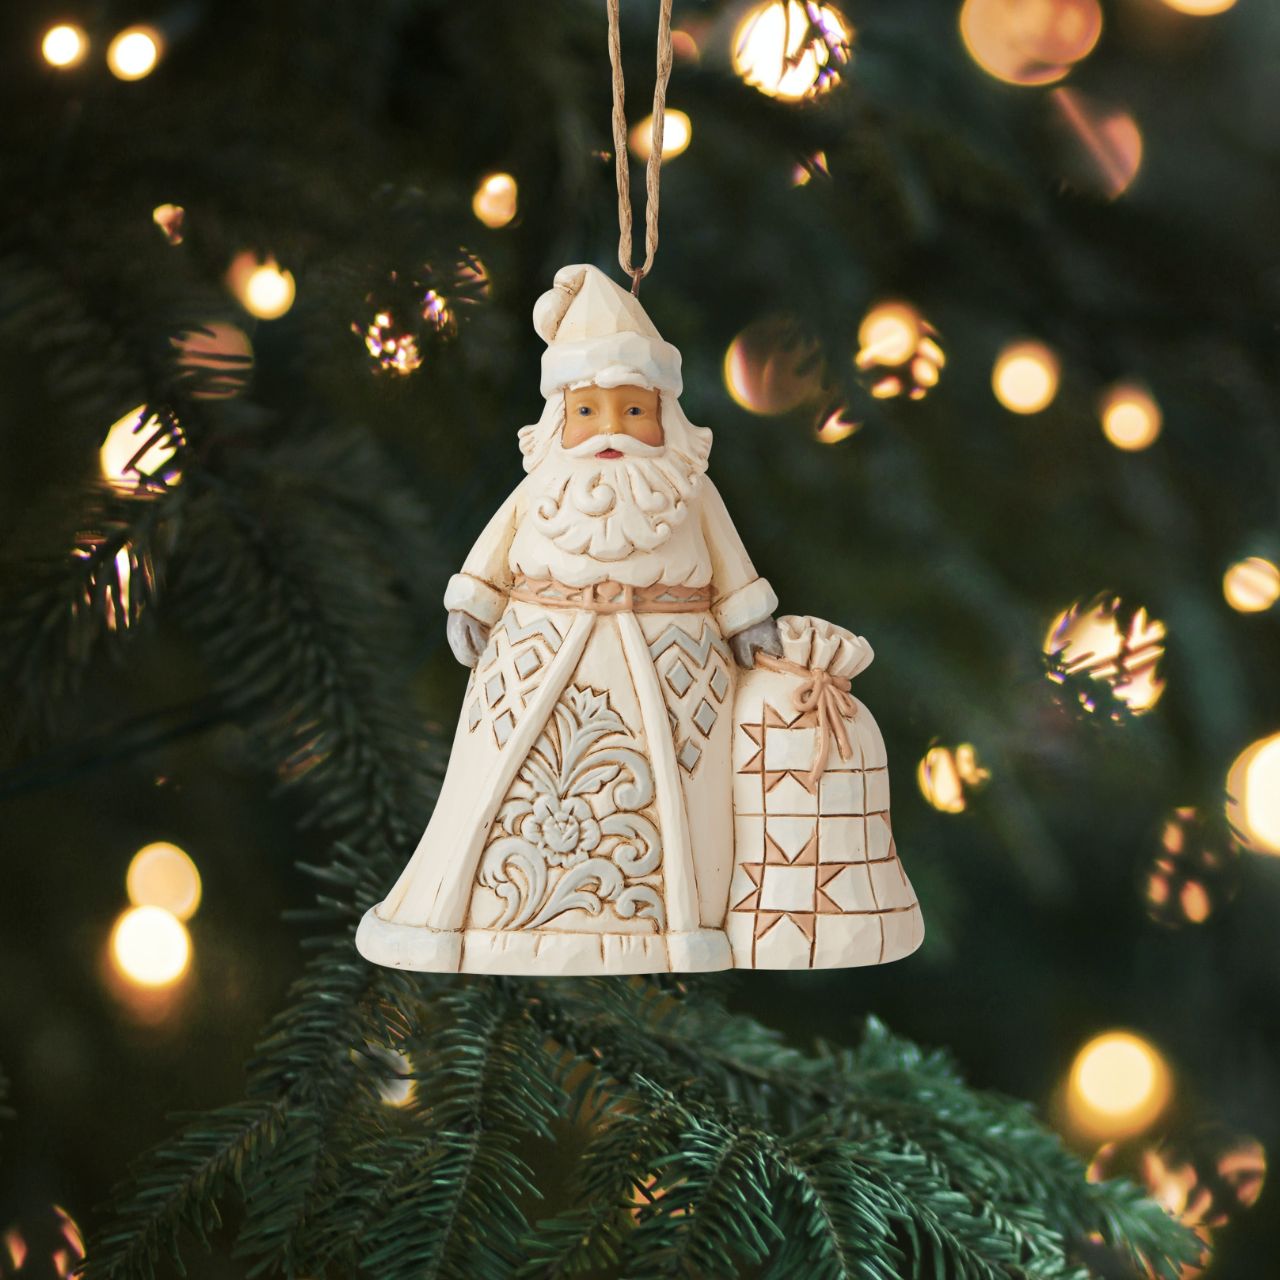 Heartwood Creek White Woodland Santa Hanging Ornament  In muted colors, this cool hued Santa brings grandeur with his deliveries. With a bag heavy with presents, this Christmas hero smiles happily from your tree, admiring the nice boys and girls as they open presents in your home.